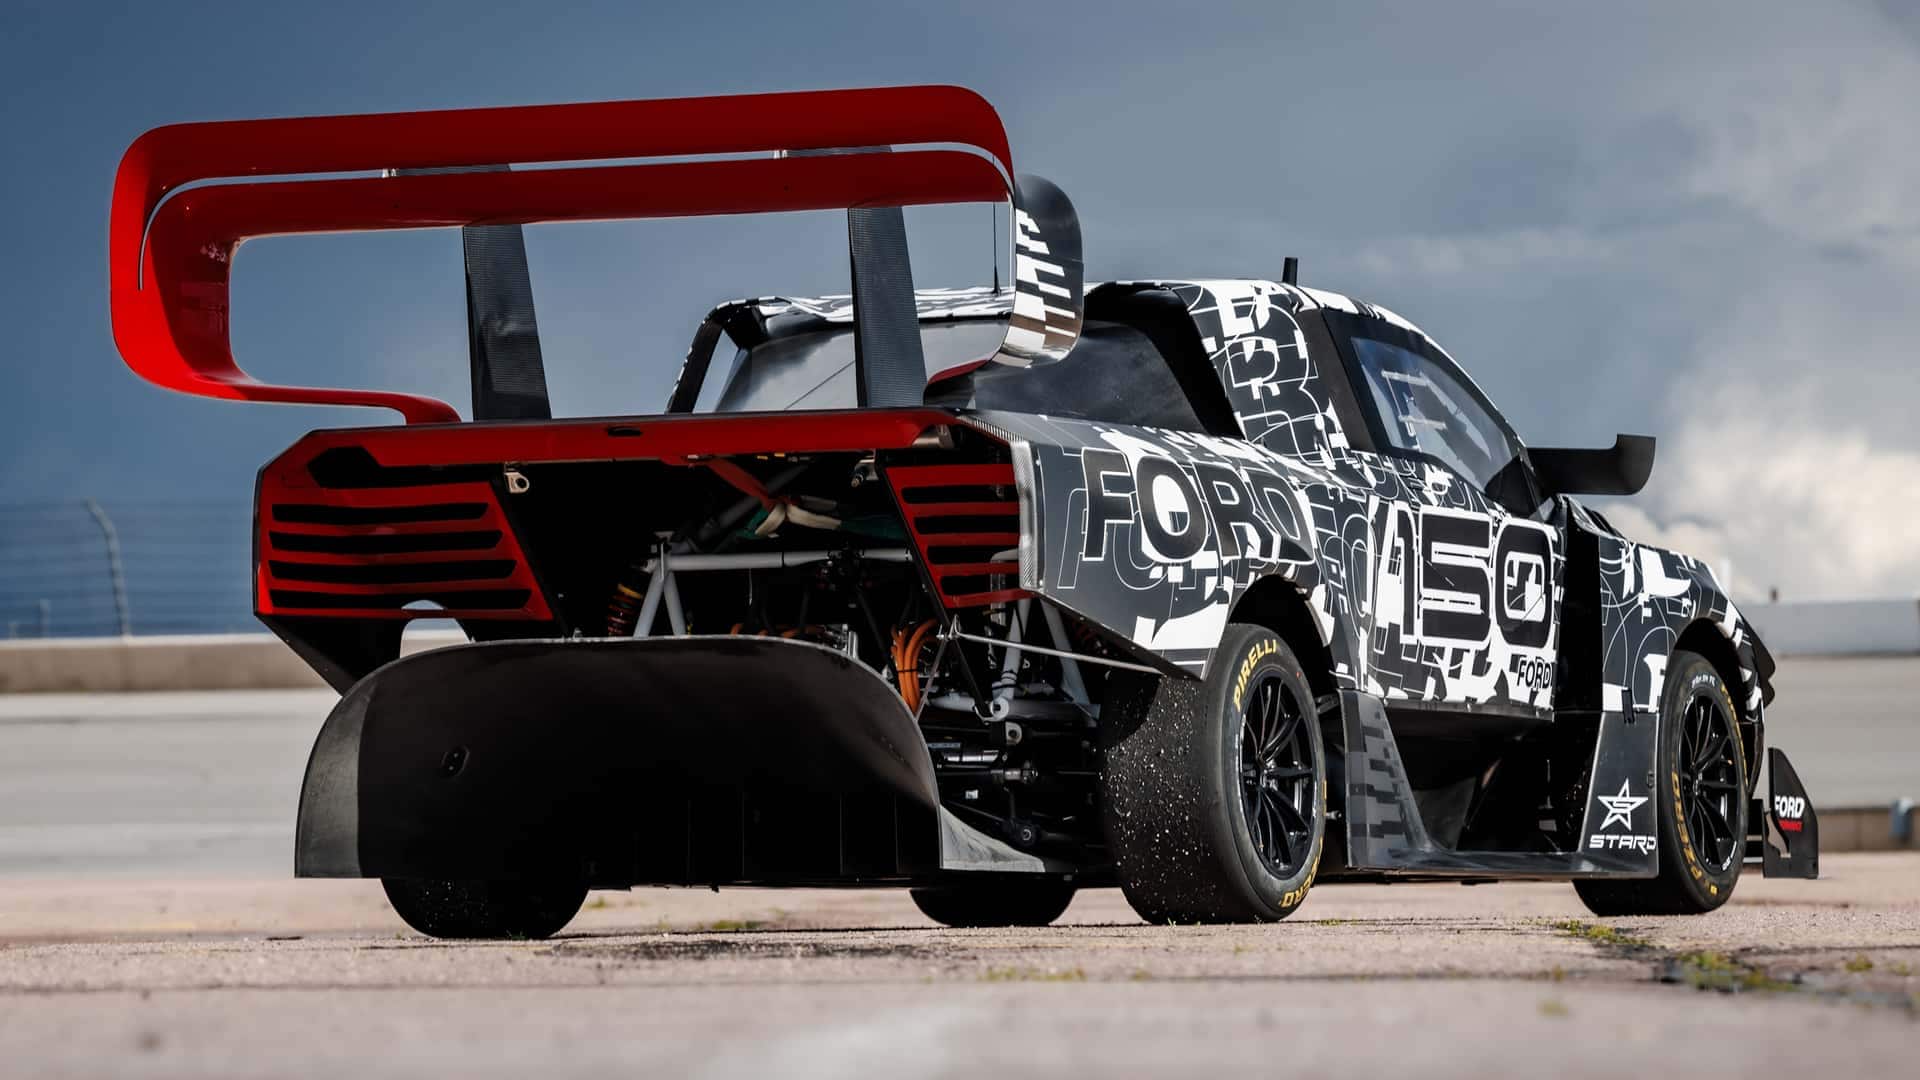 Ford reveals electric pickup truck for Pikes Peak hillclimb